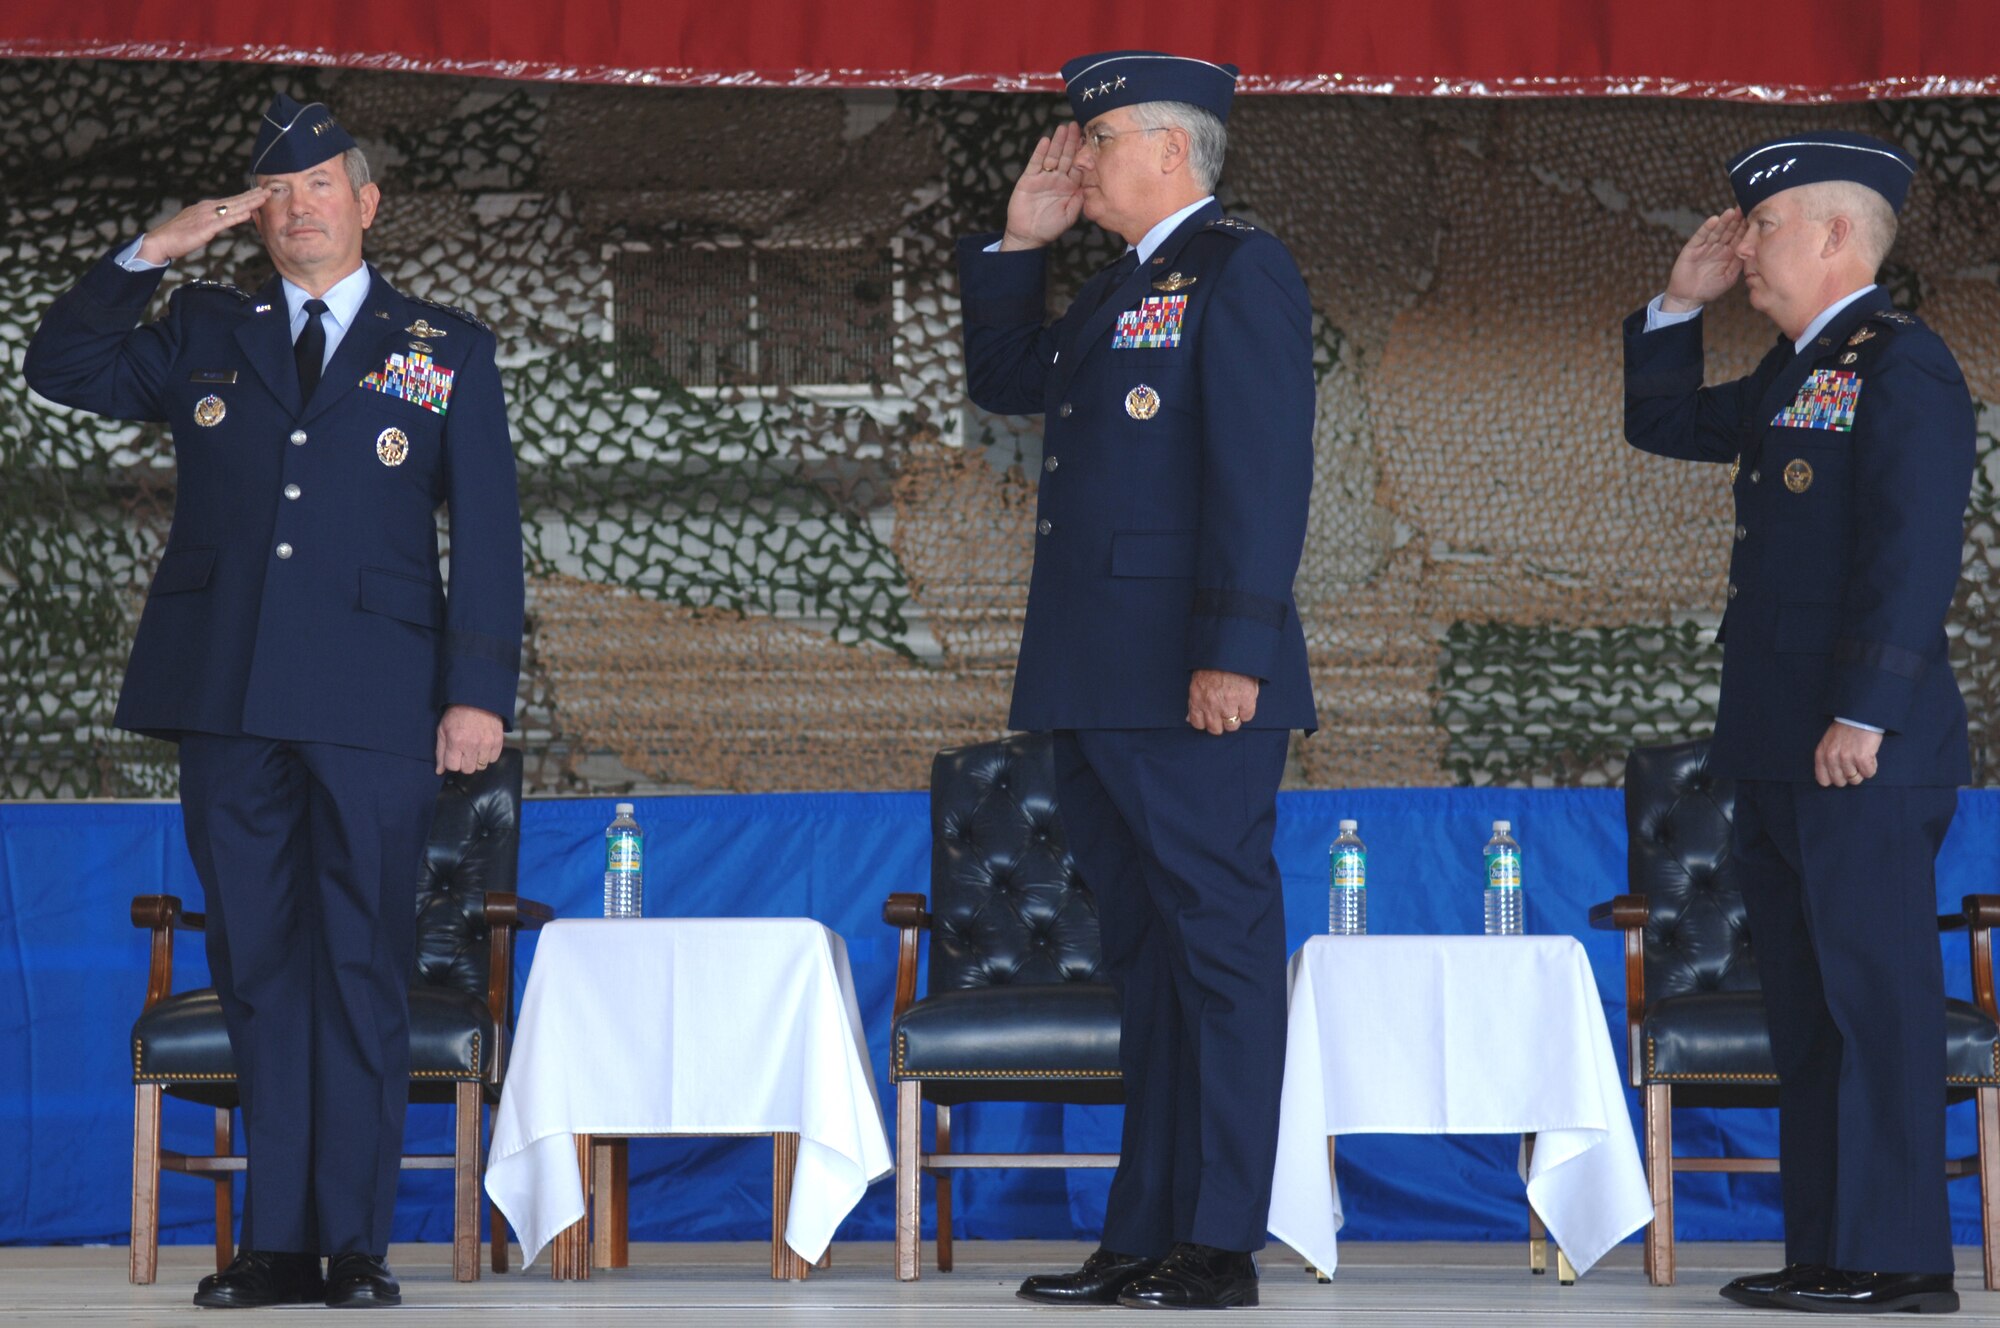 General Duncan McNabb (left), Air Force vice chief of staff, returns a salute during the playing of "Ruffles and Flourishes" as Lt. Gen. Mike Wooley (center), former Air Force Special Operations Command commander, and Lt. Gen. Donny Wurster, AFSOC commander (right), render salutes during the AFSOC change of command ceremony Nov. 27 at Hurlburt Field, Fla. (U.S. Air Force photo/Senior Airman Ali Flisek)